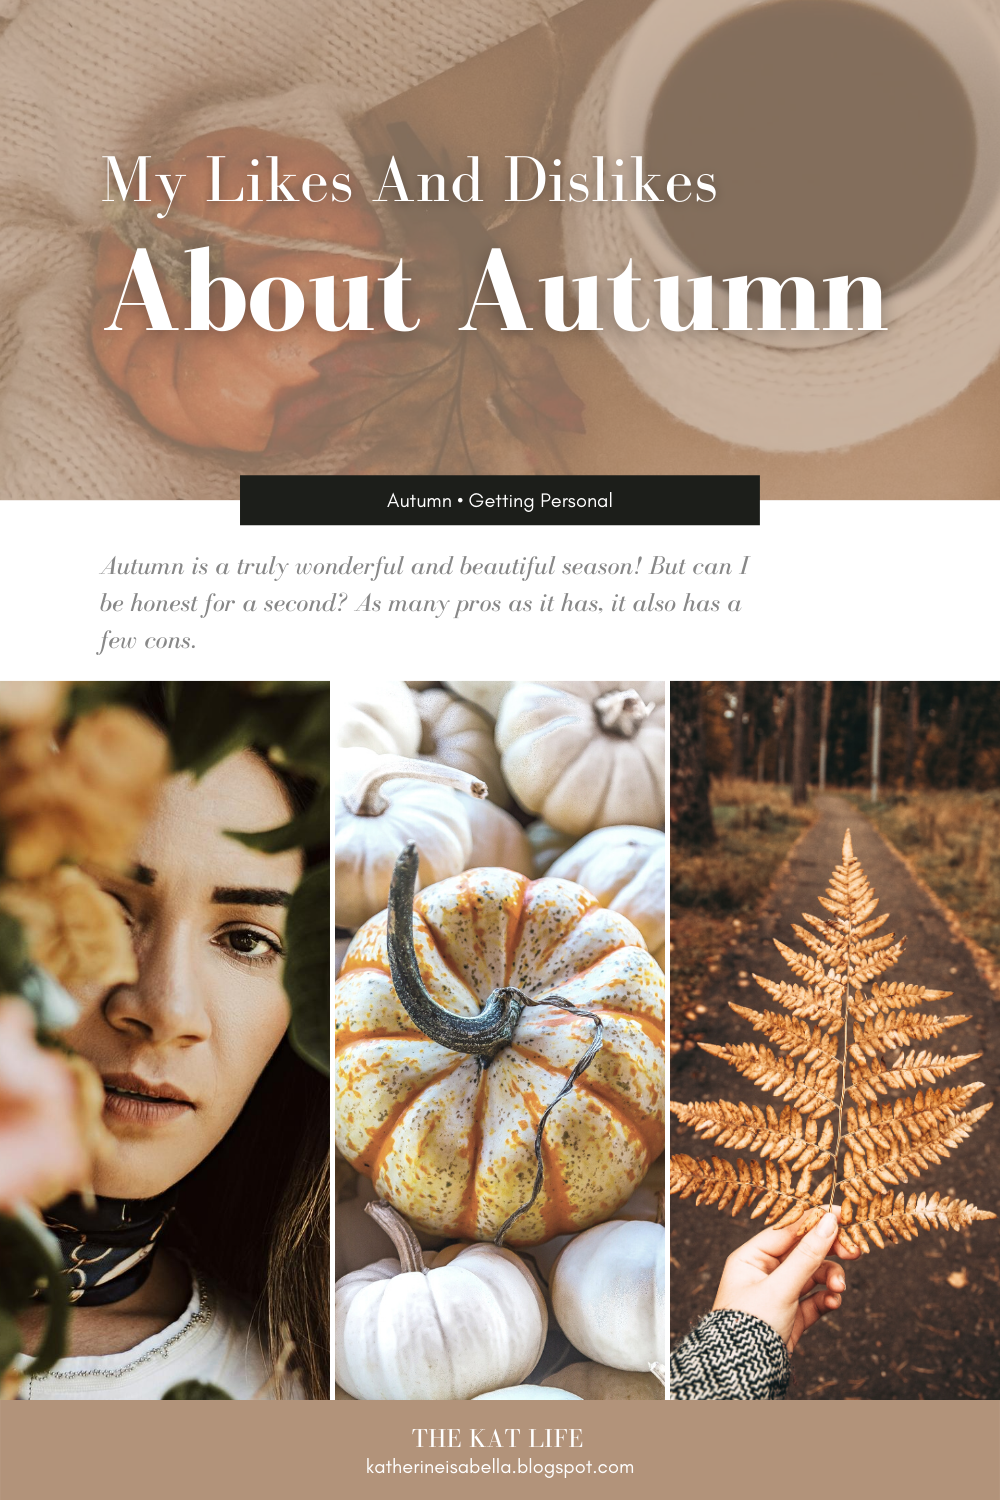 My Likes And Dislikes About Autumn